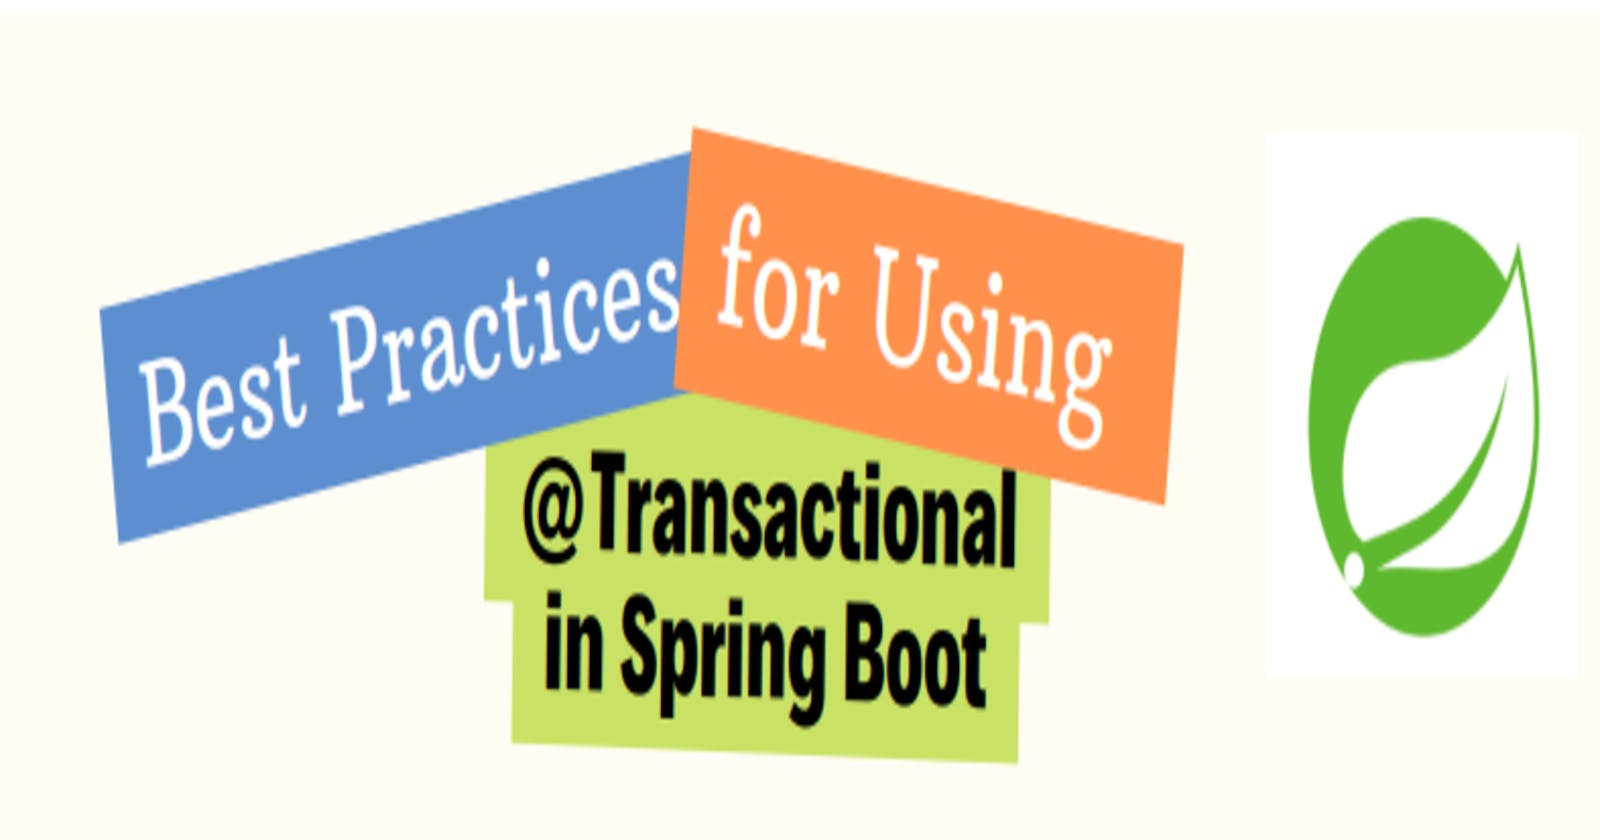 Best Practices for Using @Transactional in Spring Boot